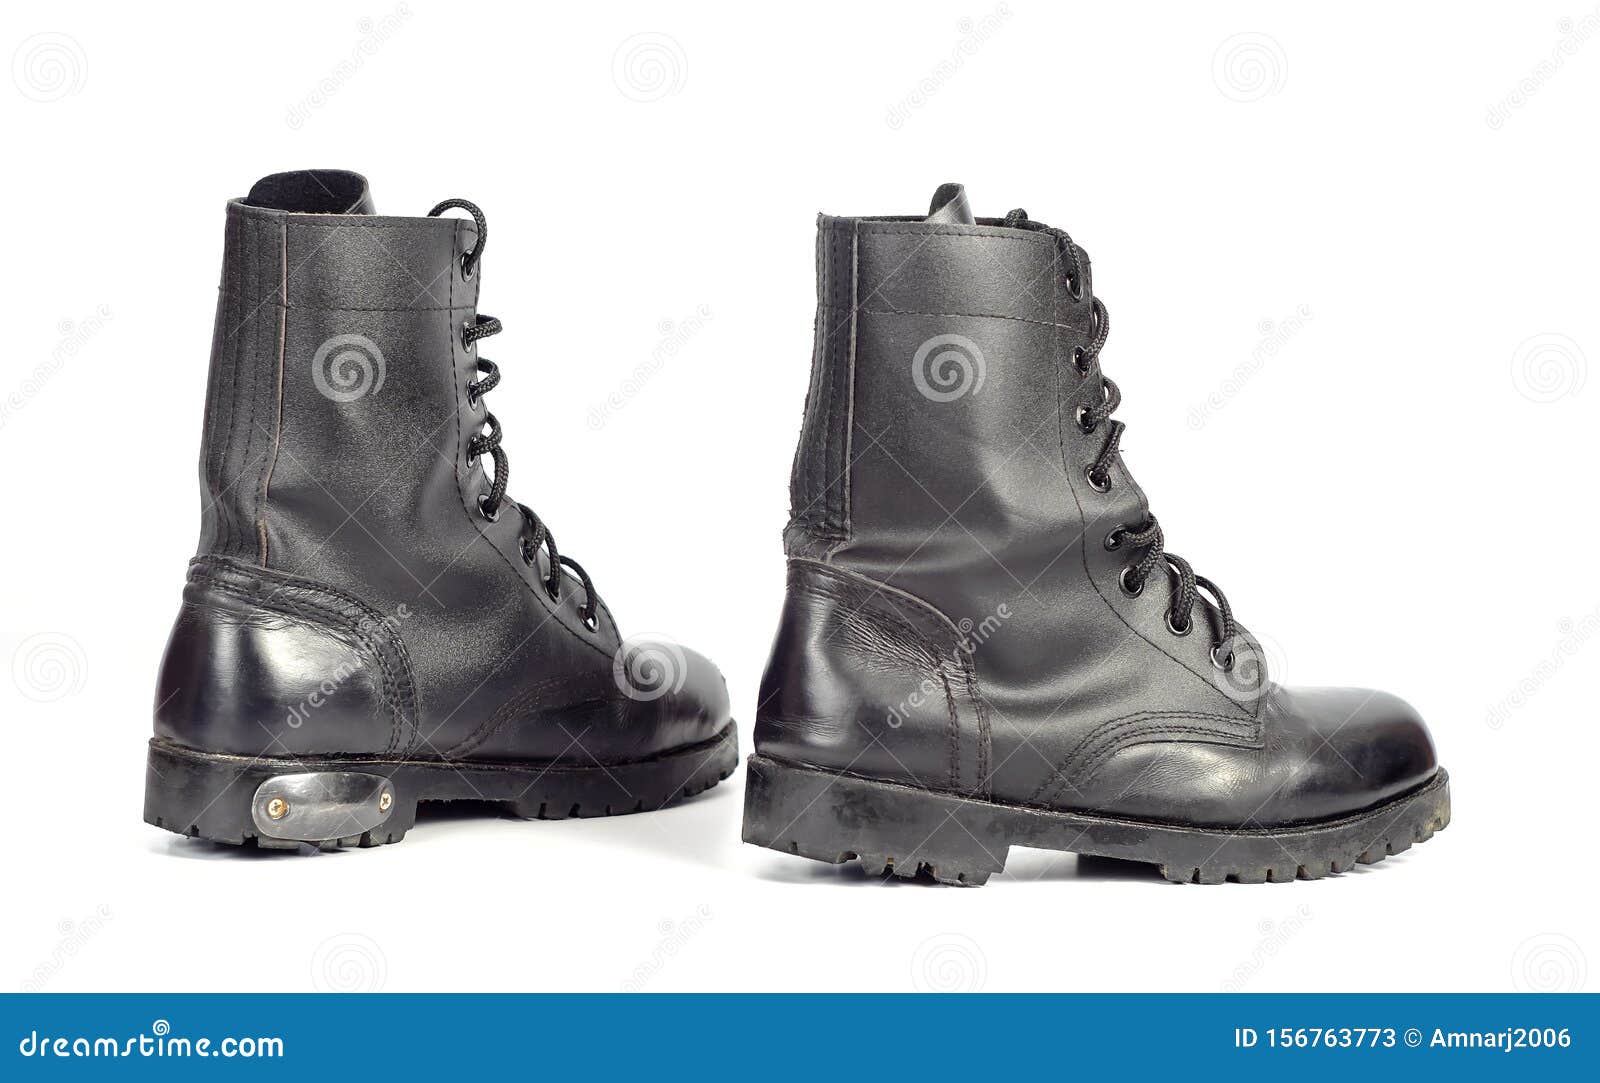 Black Leather Combat Boot or Army Boots Stock Image - Image of pair ...